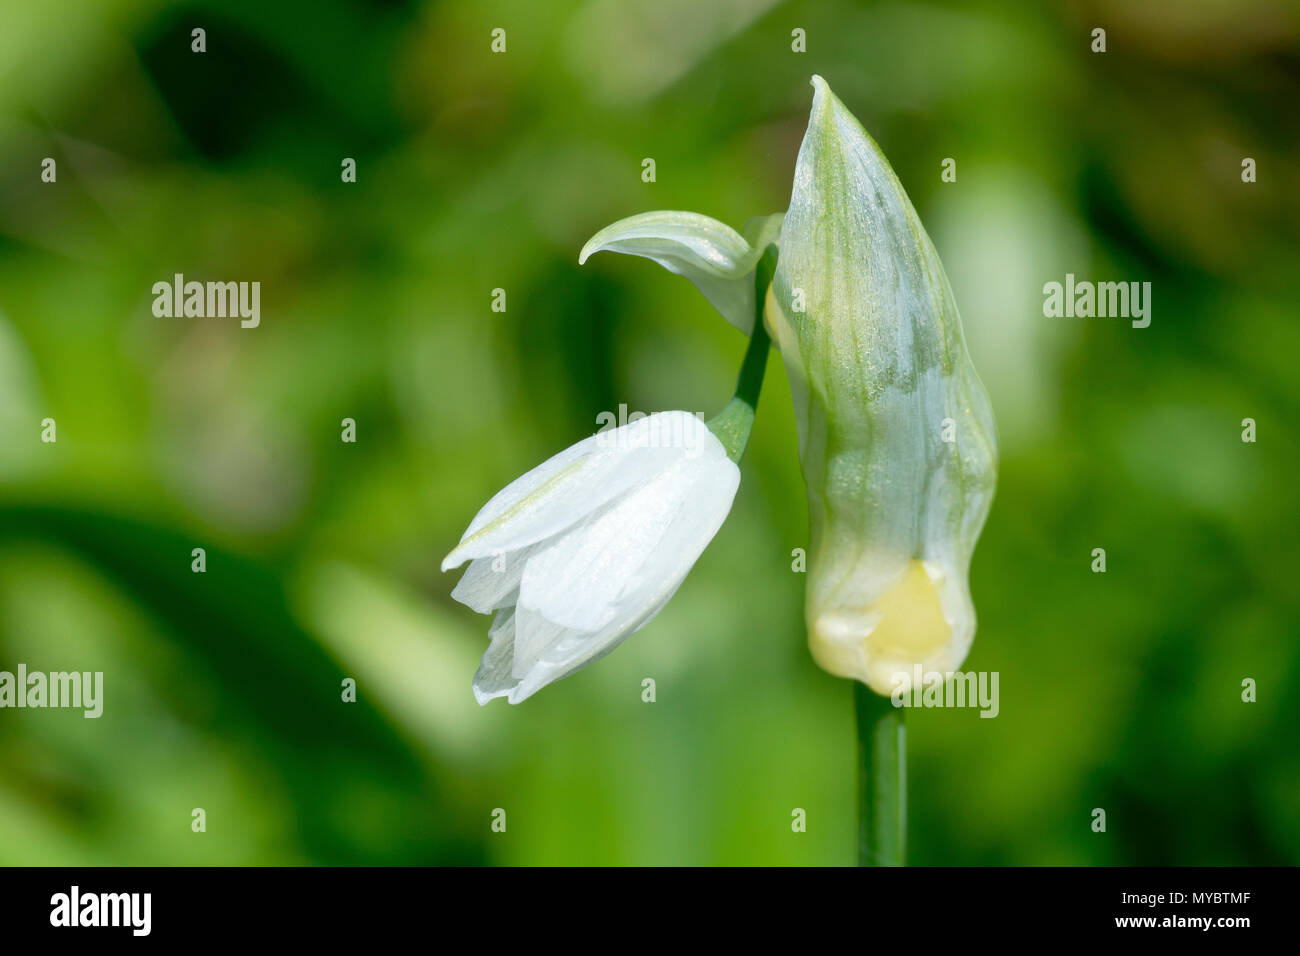 Few-flowered Leek (allium paradoxum), close up of a single flower emerging from the bud. Stock Photo